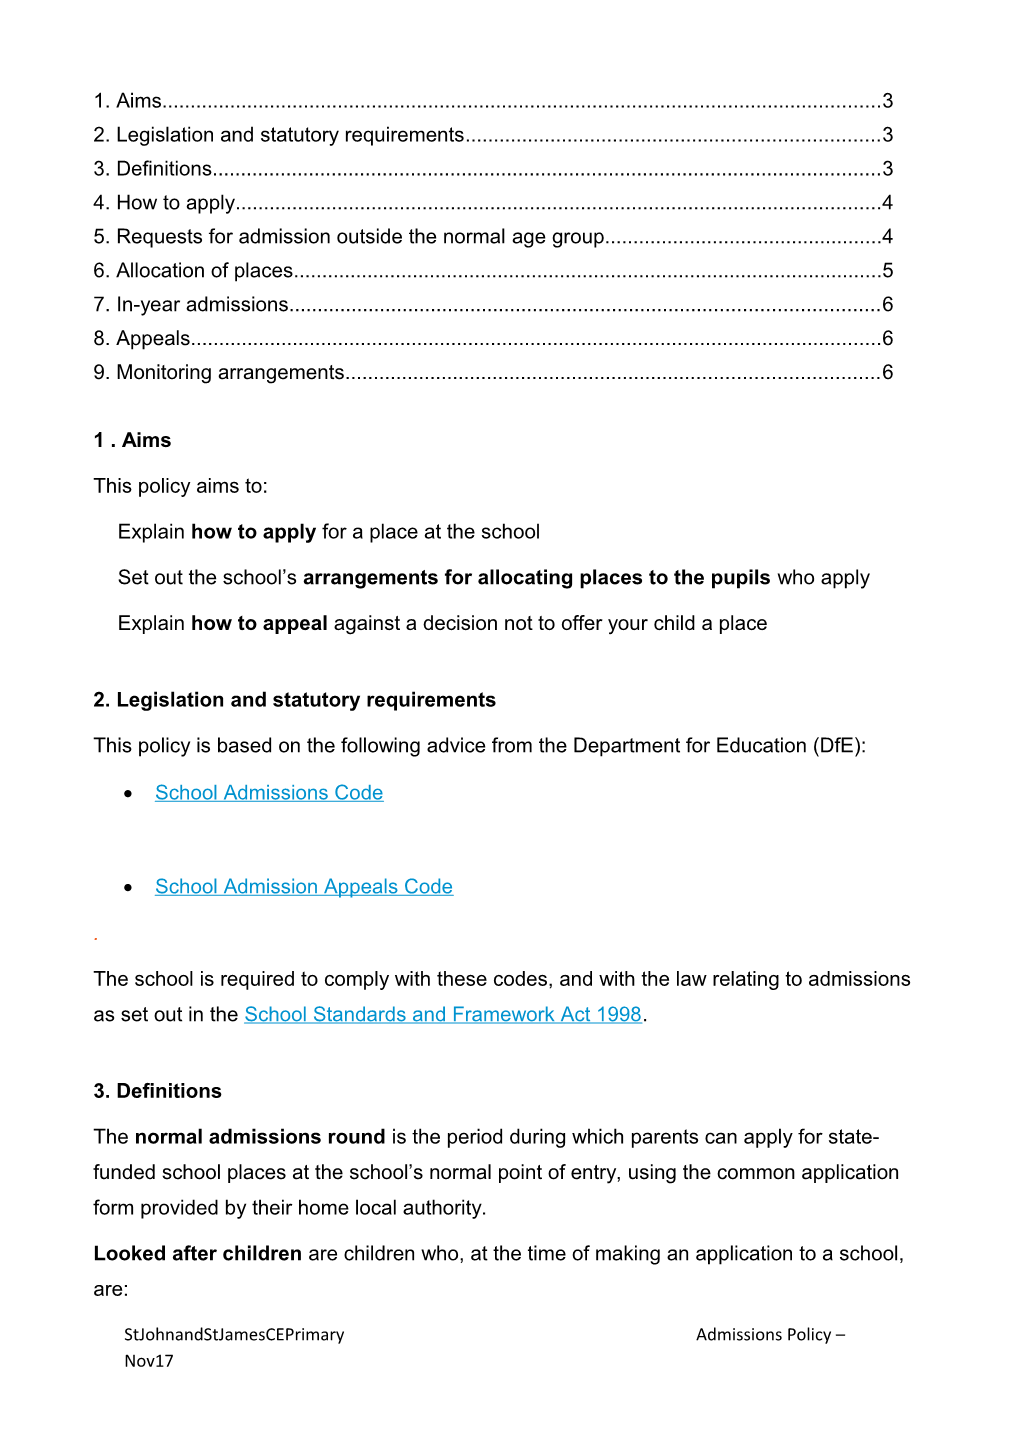 St James' CEC Primary School Policy Template